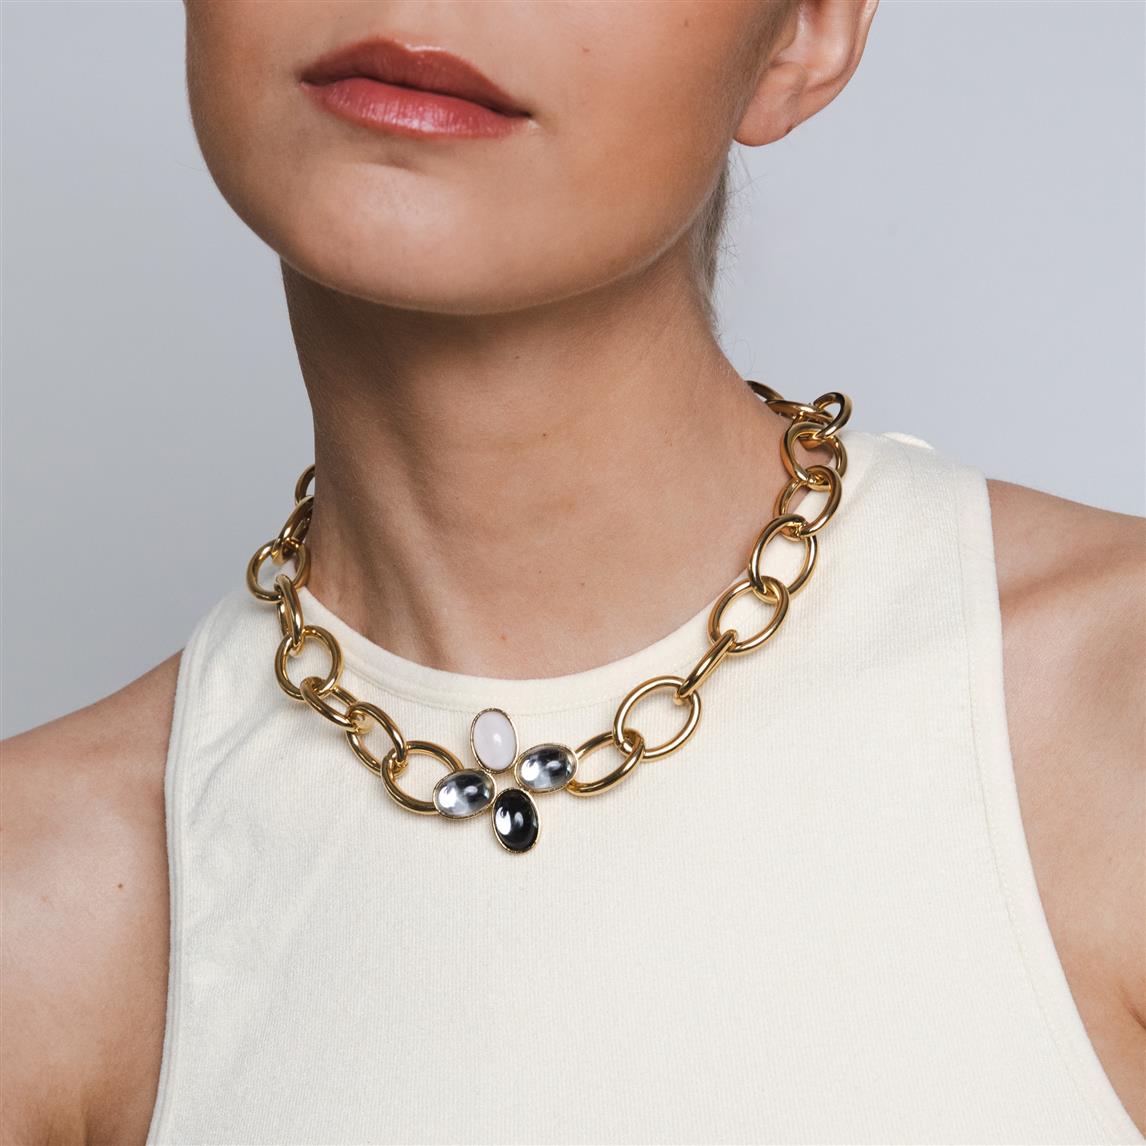 Loulou sophisticated neutrals necklace